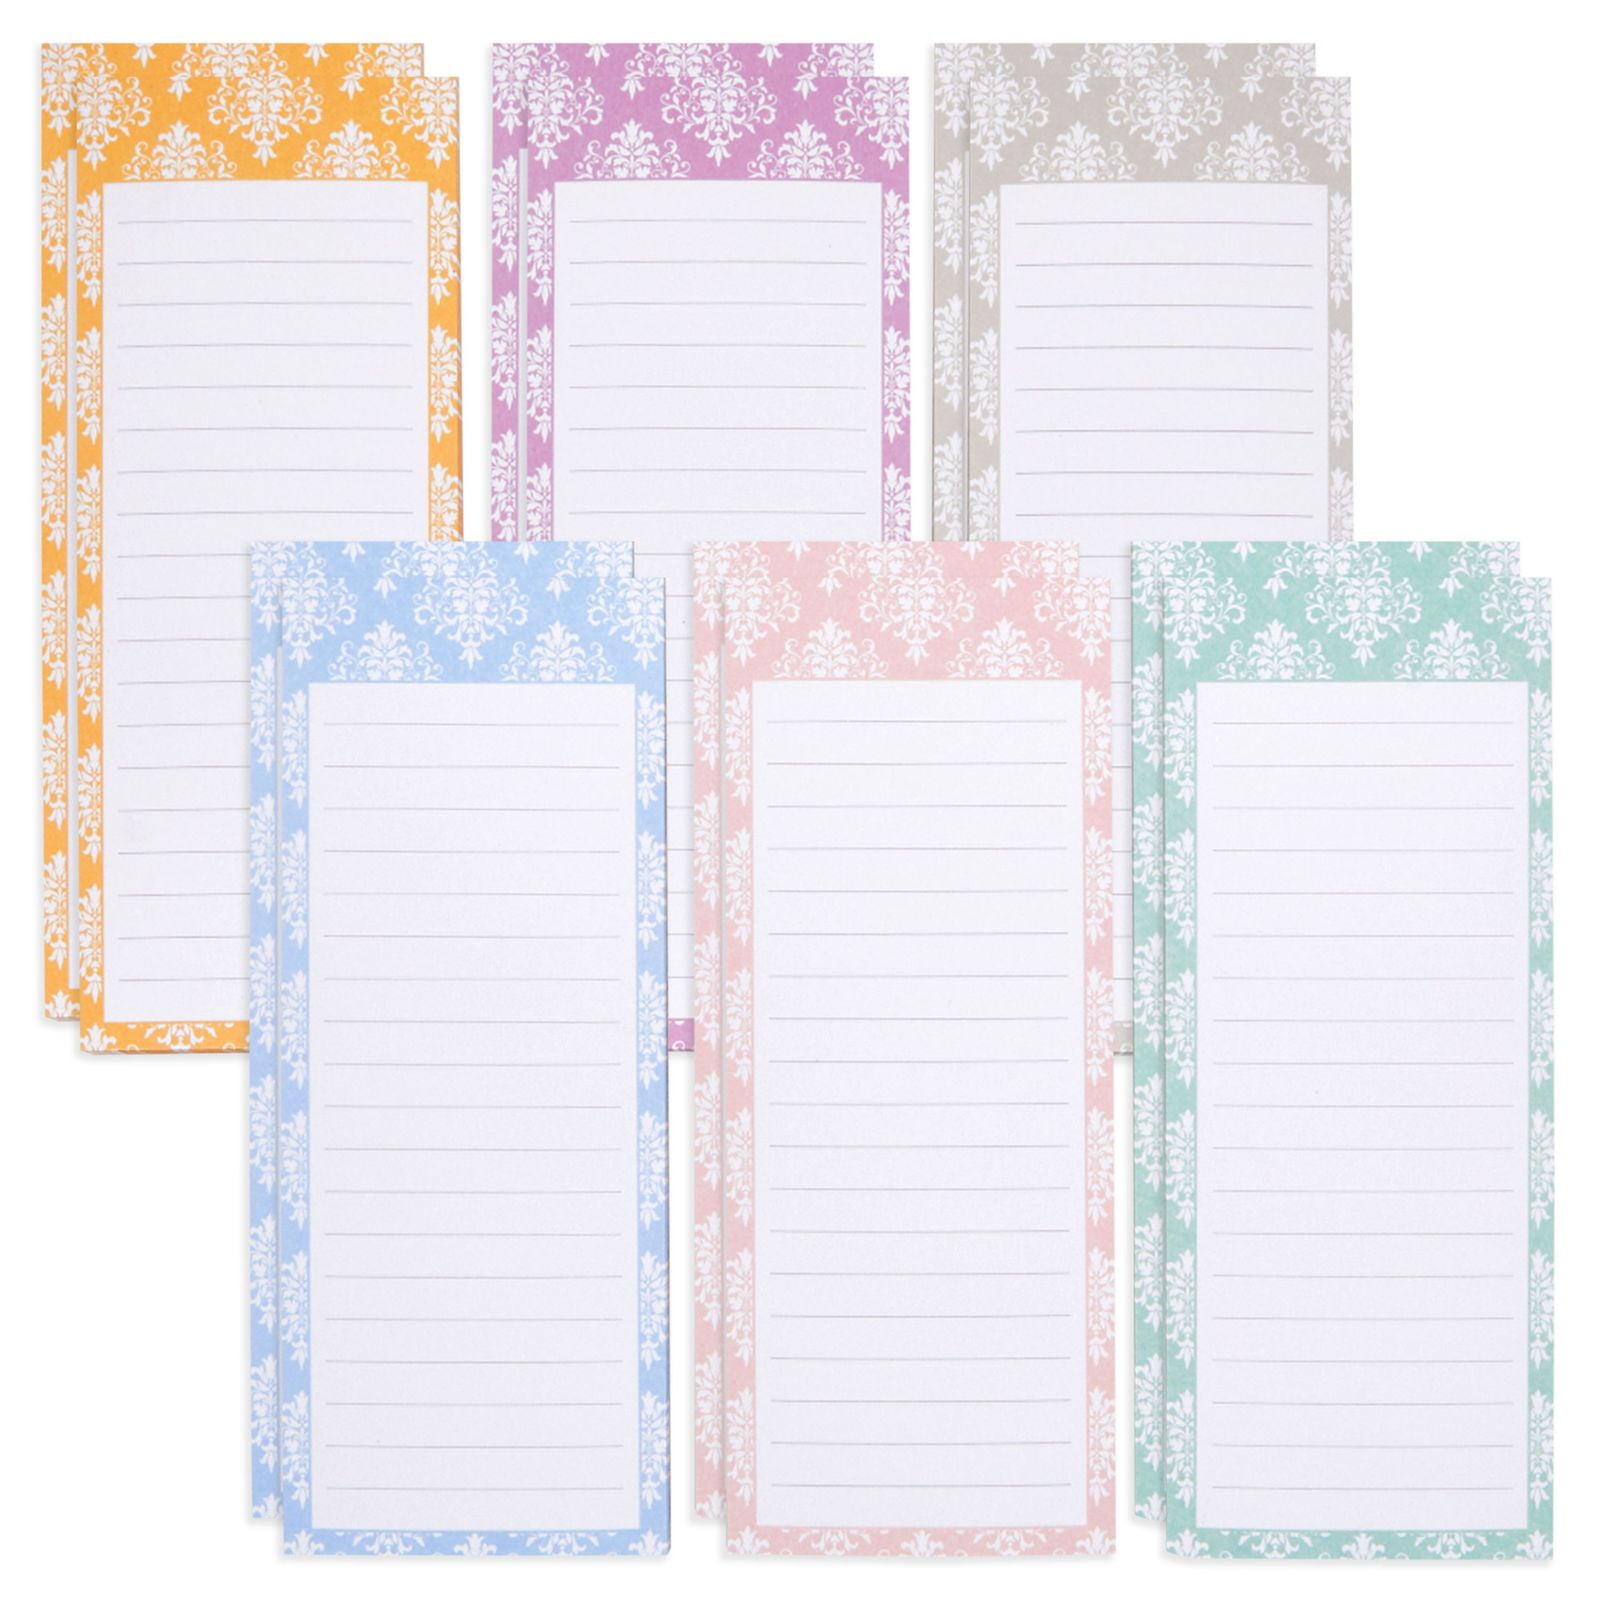 Matching Pen Tear Off Sheets Lists Magnetic Shopping Pads 